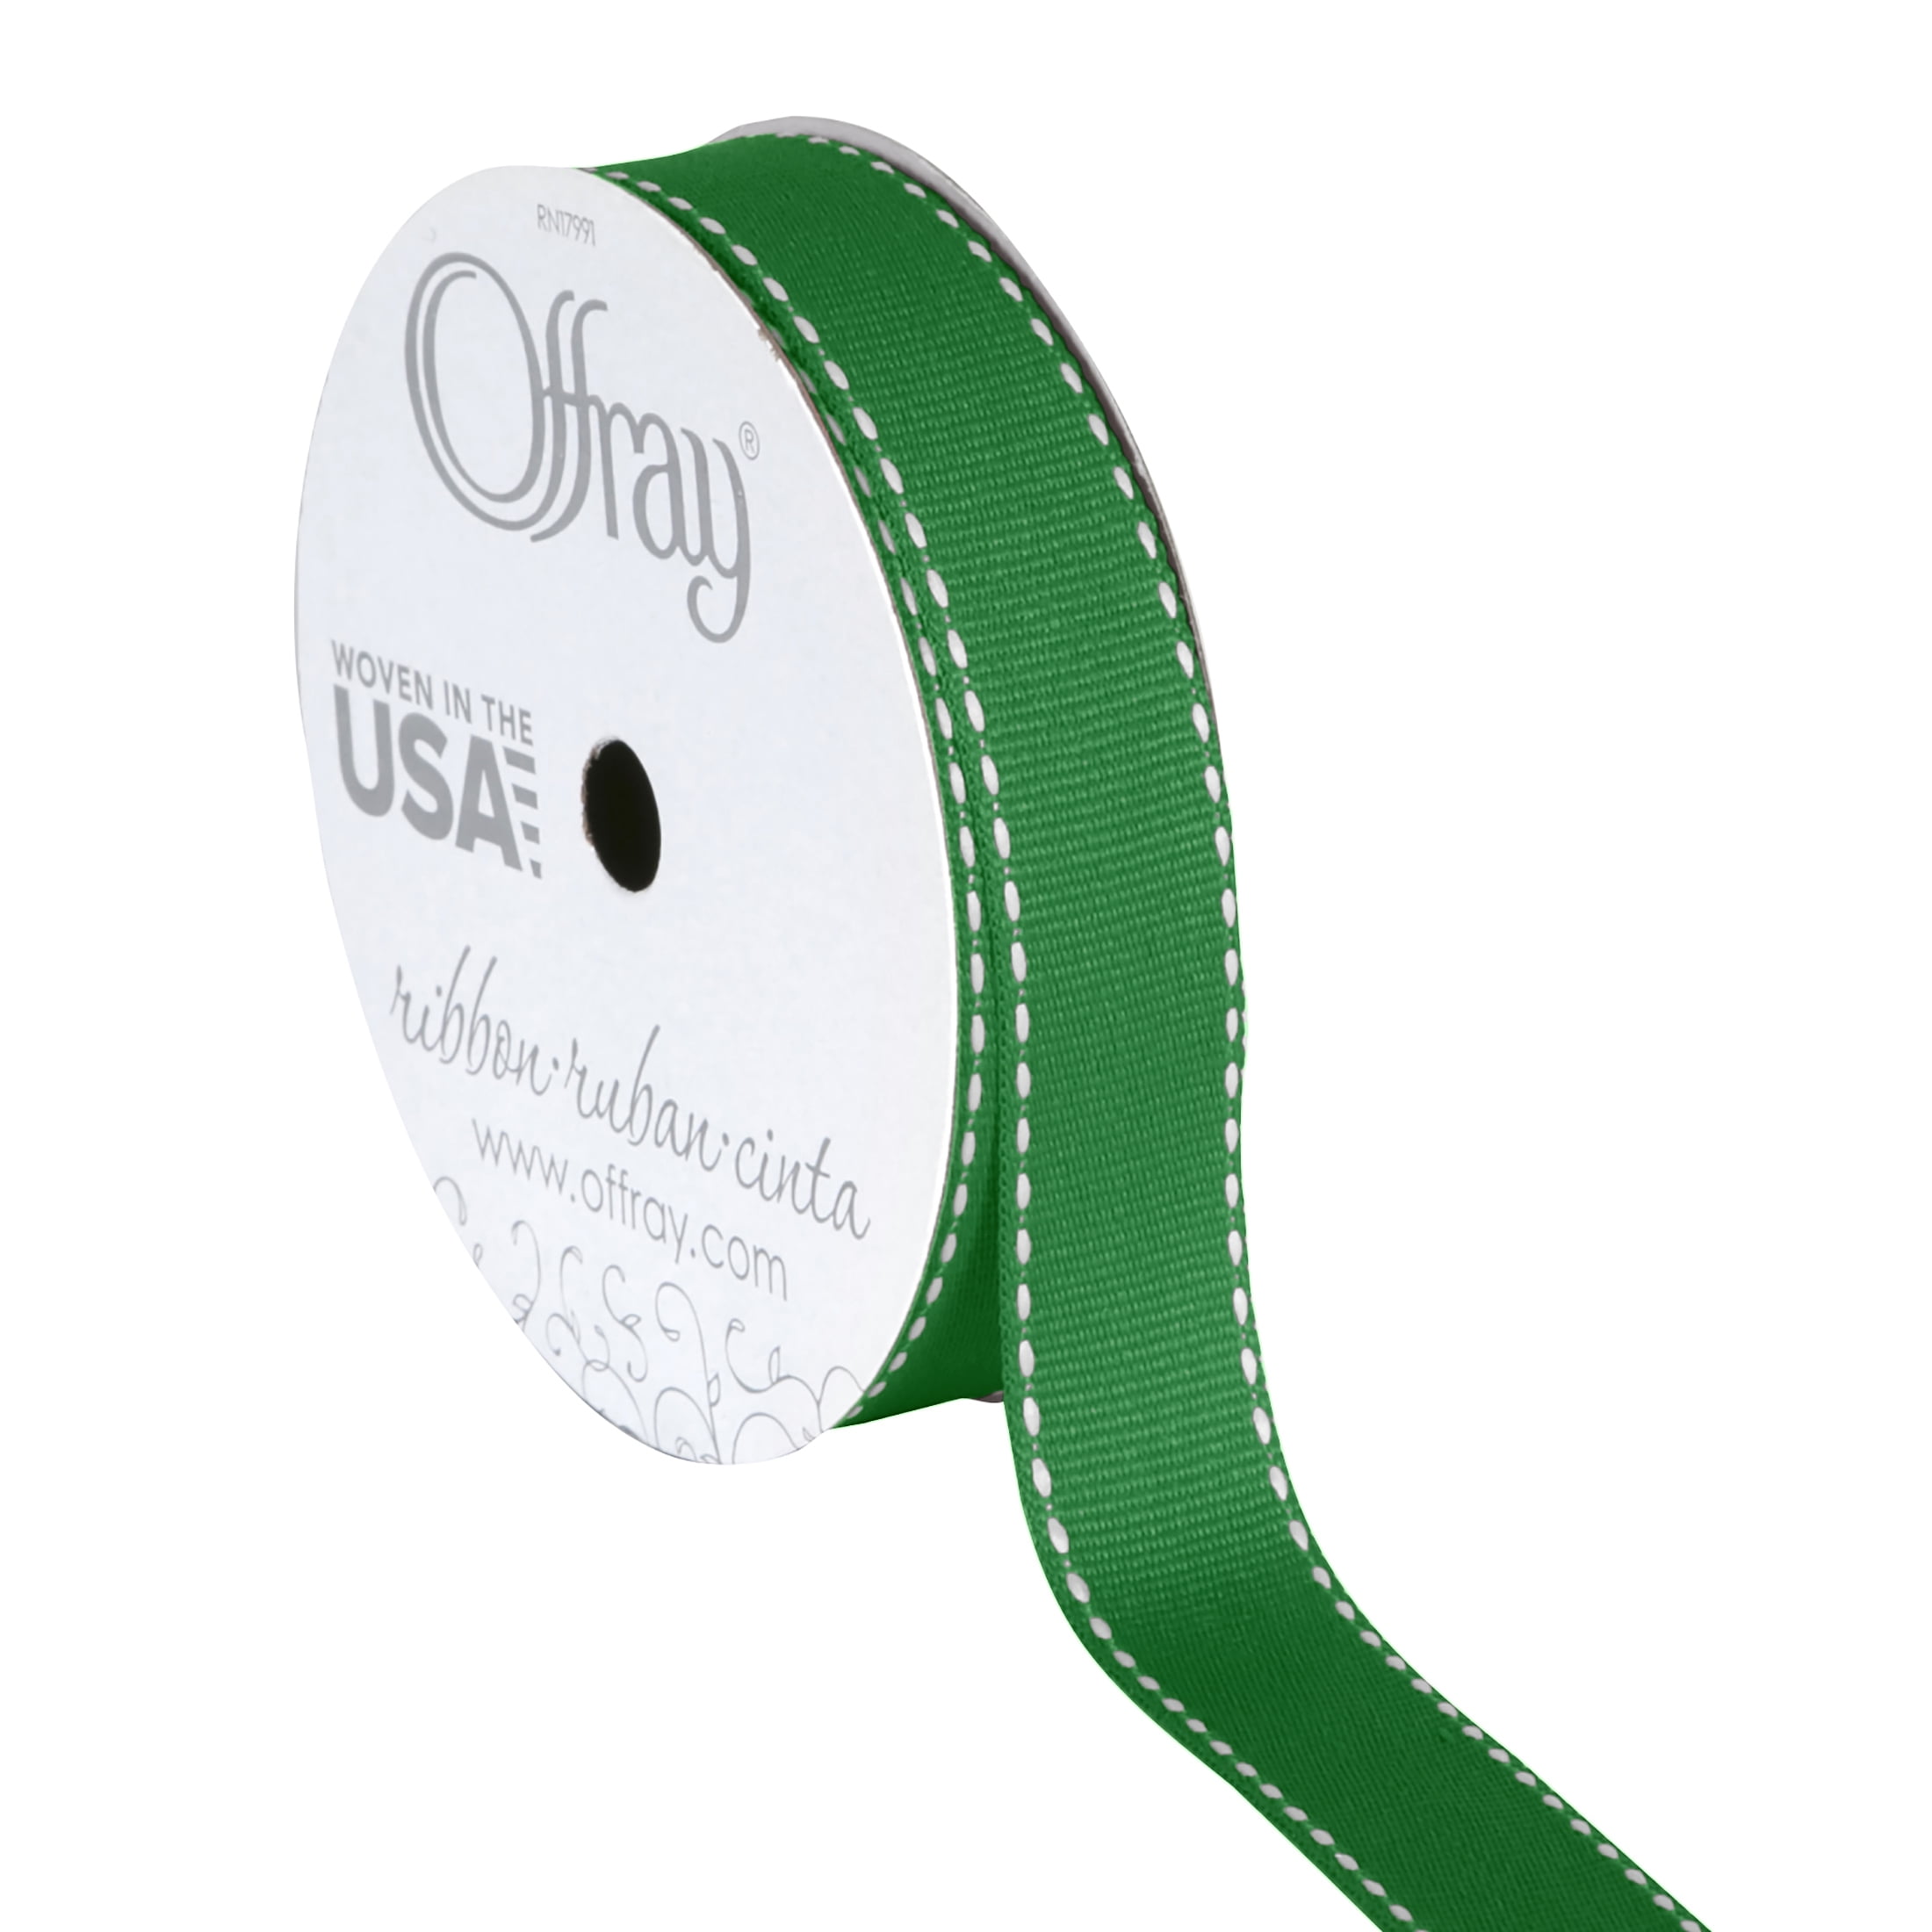 Offray 7/8 x 9' Clear Edge Solid Grosgrain Ribbon